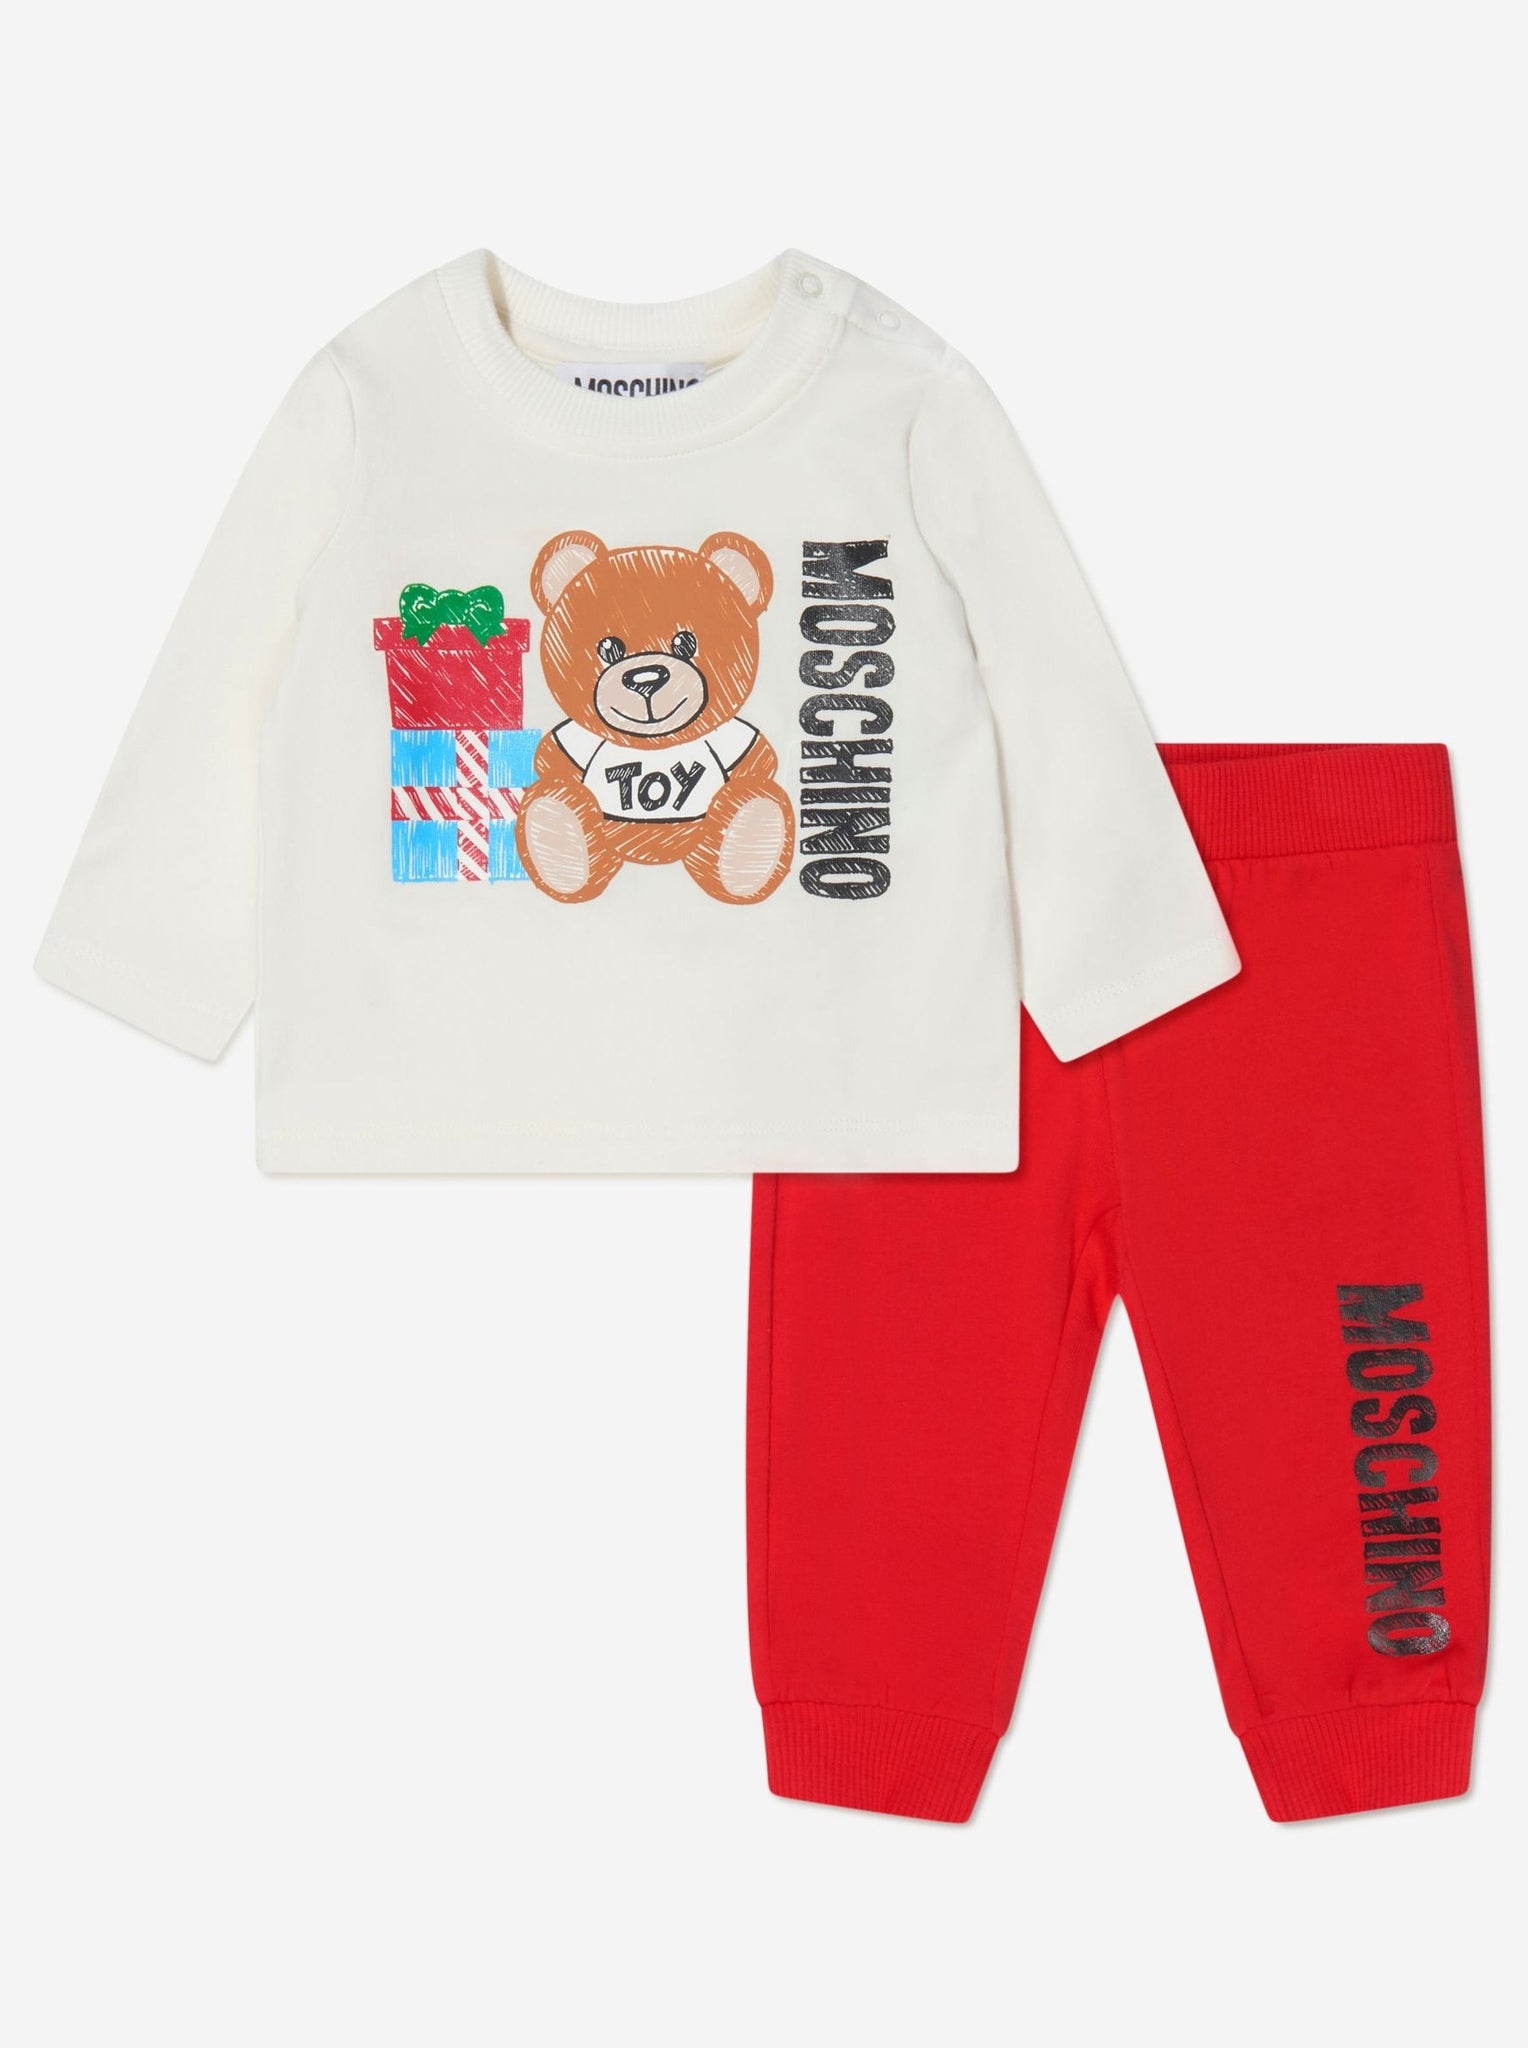 T SHIRT PANT SET WITH BEAR PRESENT GRAPHIC - CLOUD RED